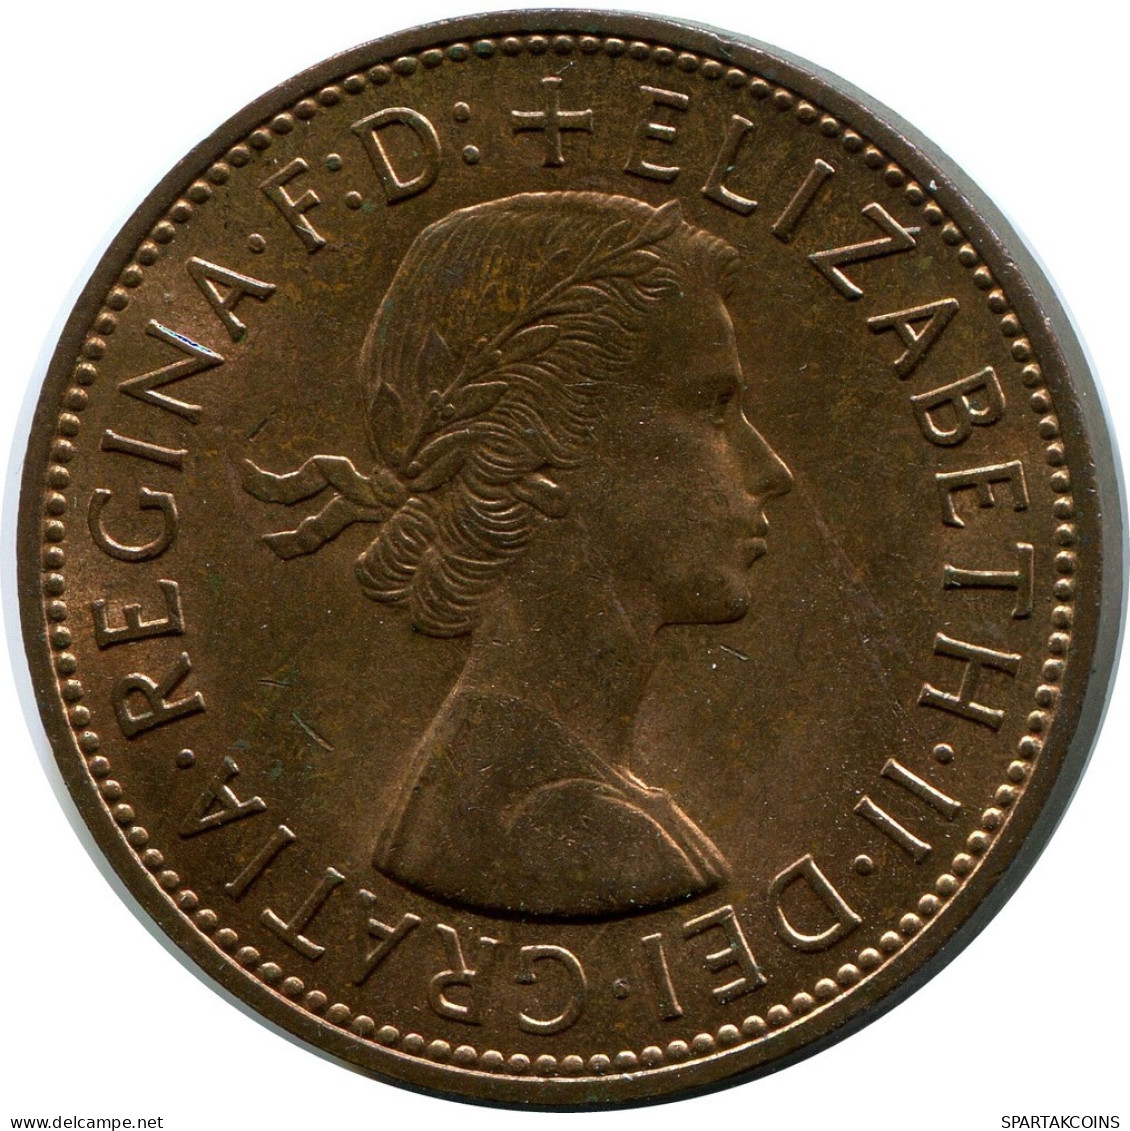 PENNY 1966 UK GREAT BRITAIN Coin #BB036.U.A - D. 1 Penny